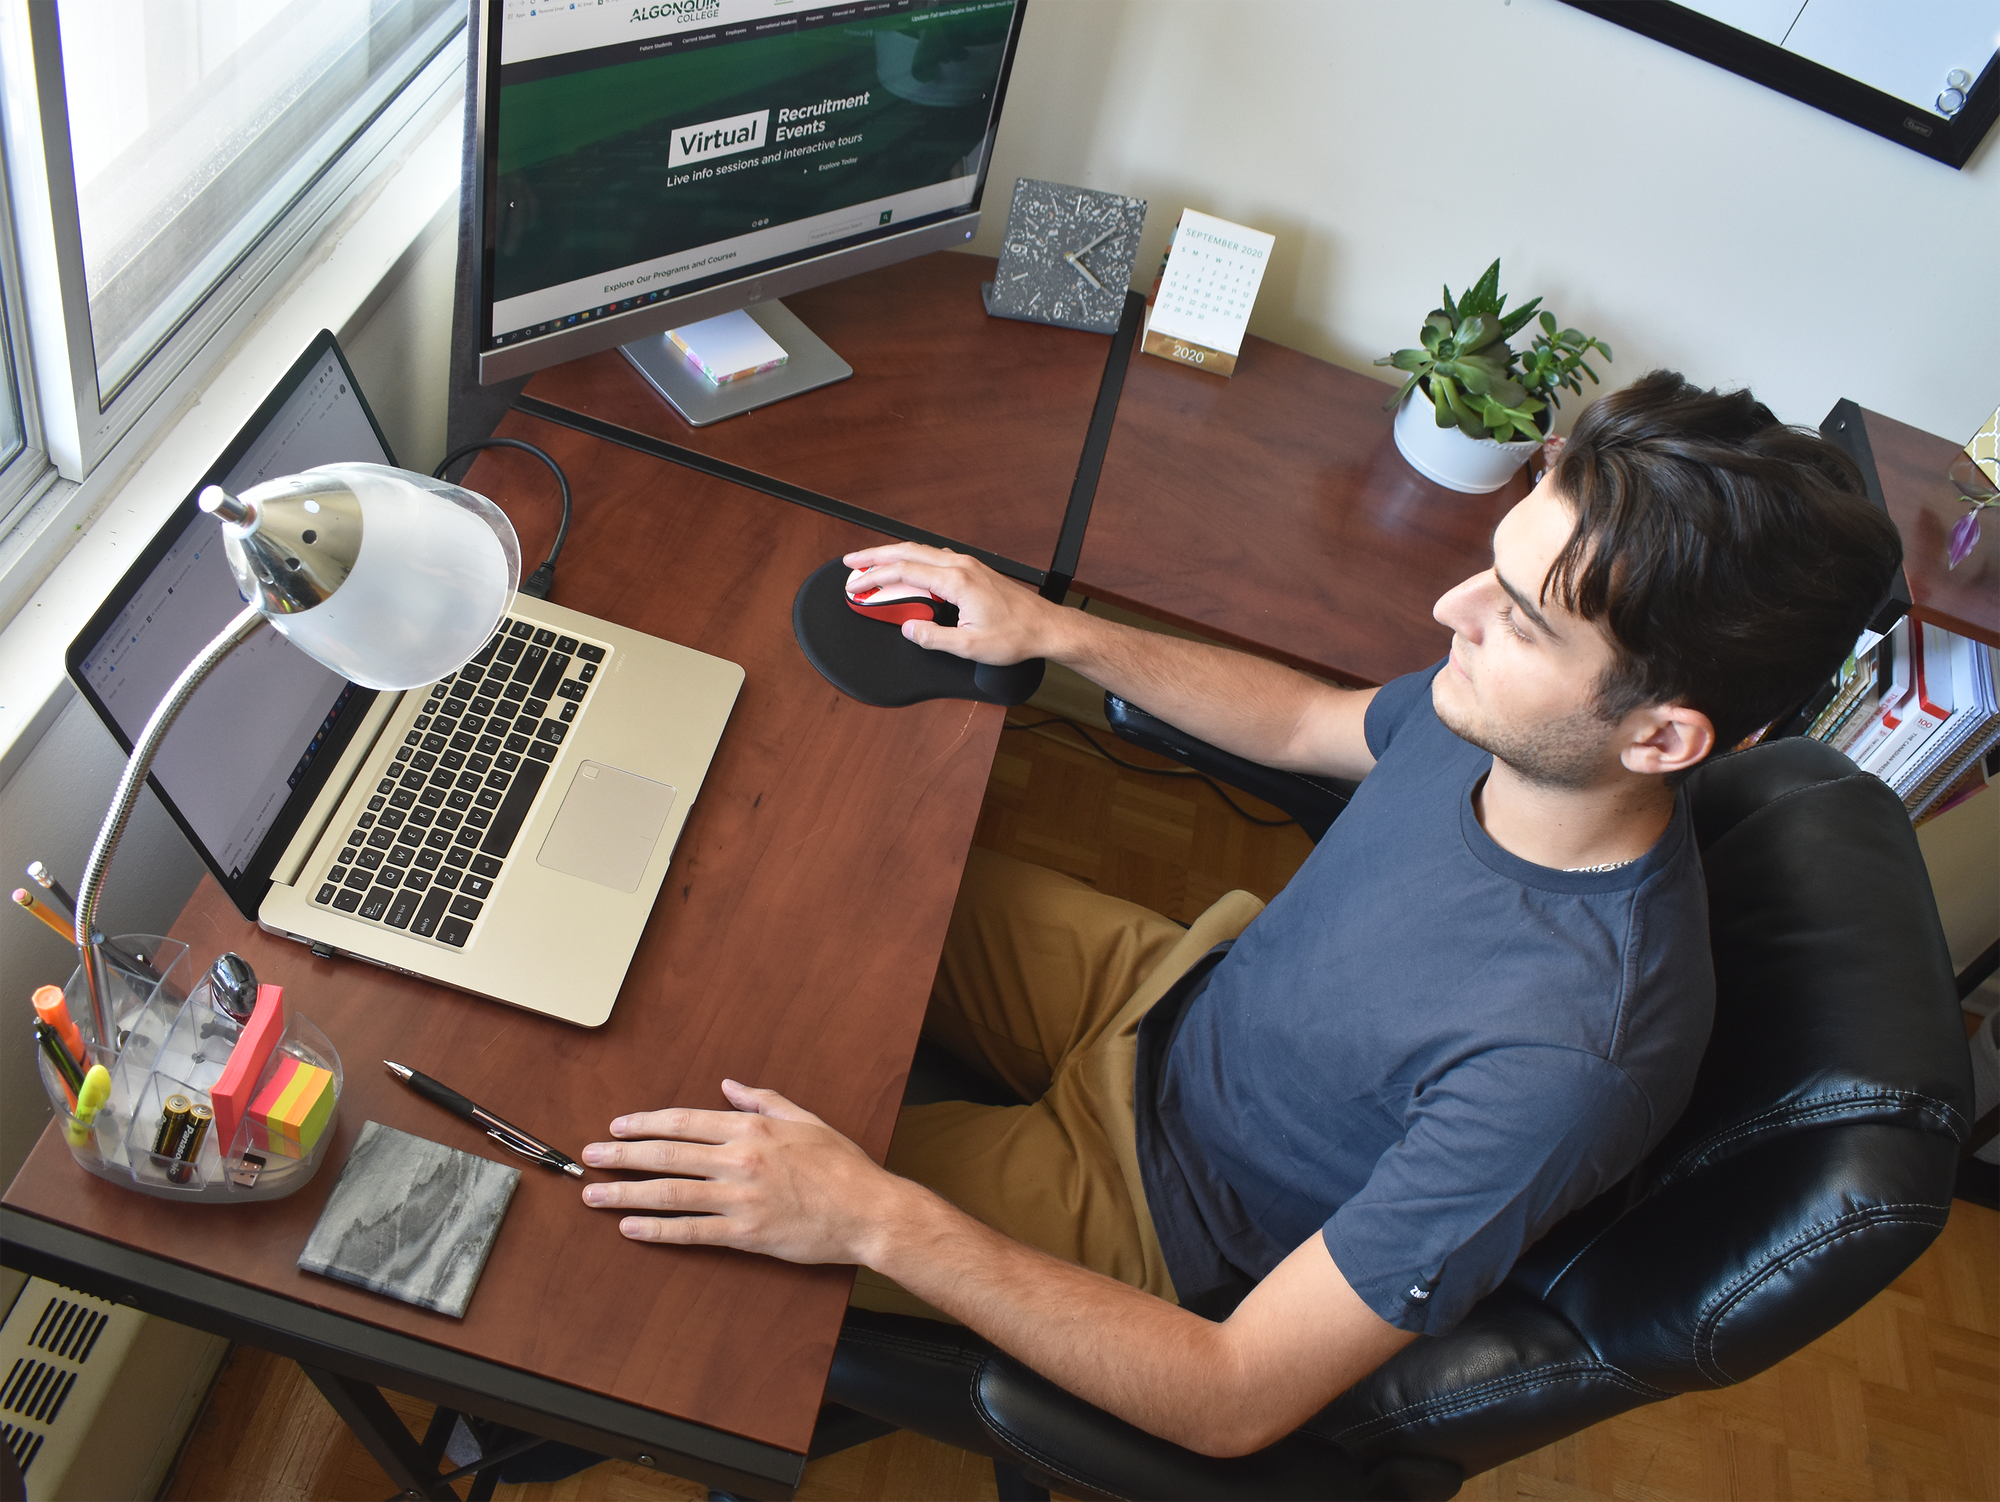 Students learning remotely may need a lesson in ergonomics